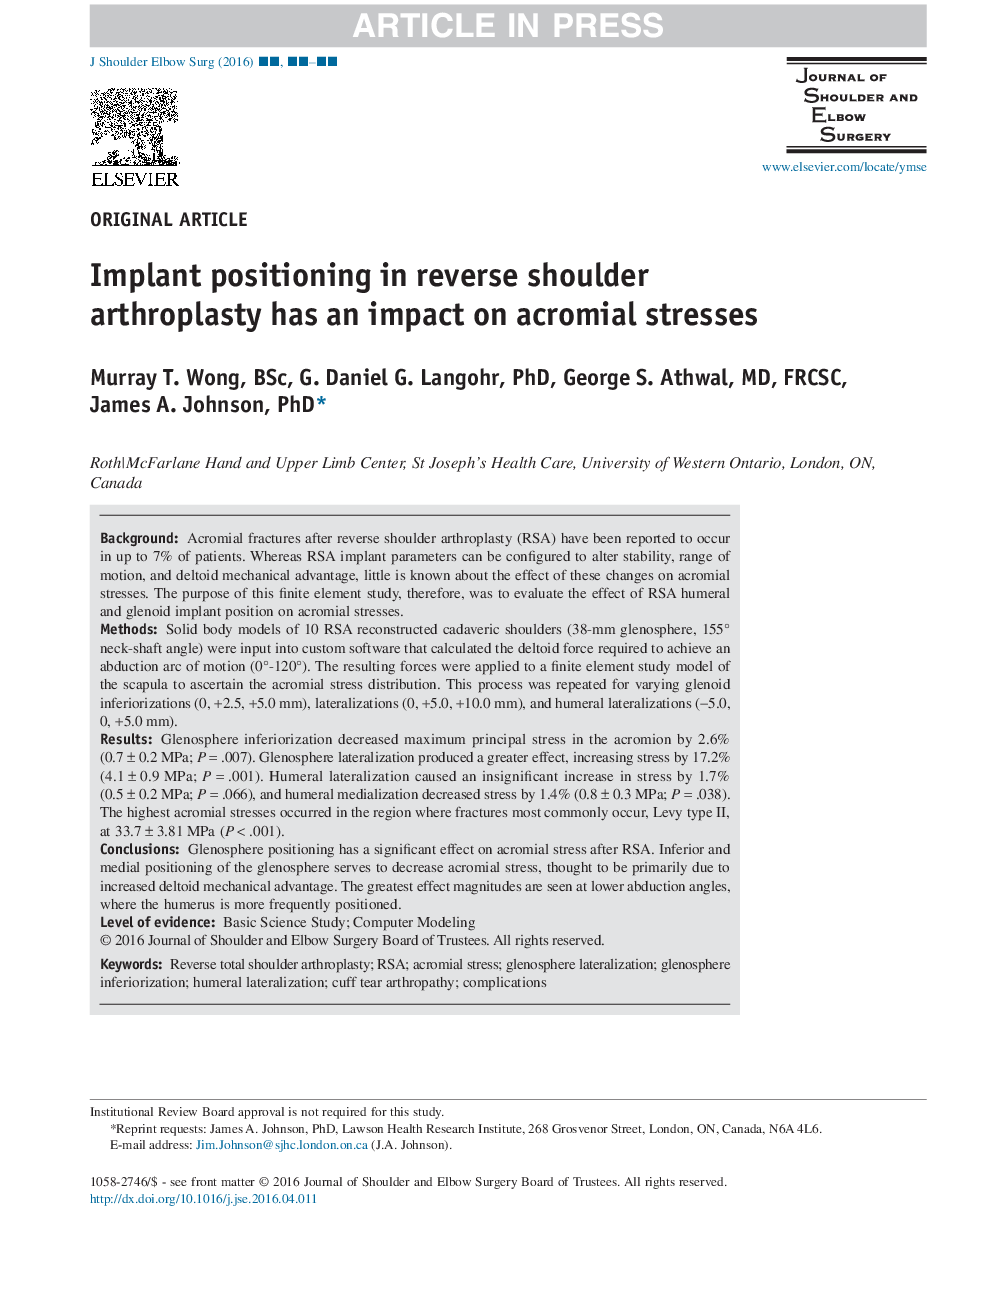 Implant positioning in reverse shoulder arthroplasty has an impact on acromial stresses